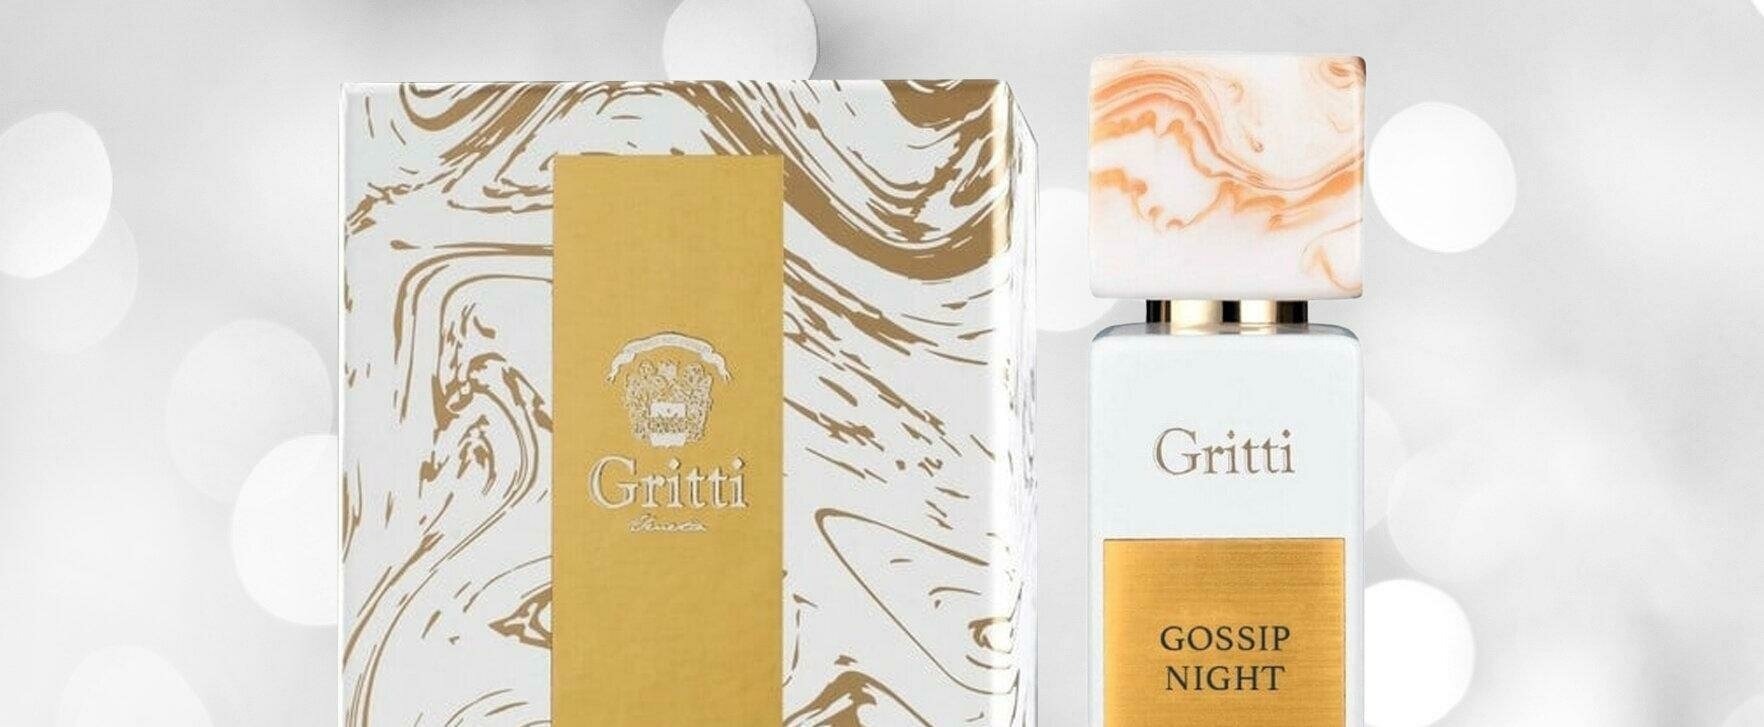 "Gossip Night": A New Highlight In the "White Collection" By Gritti 